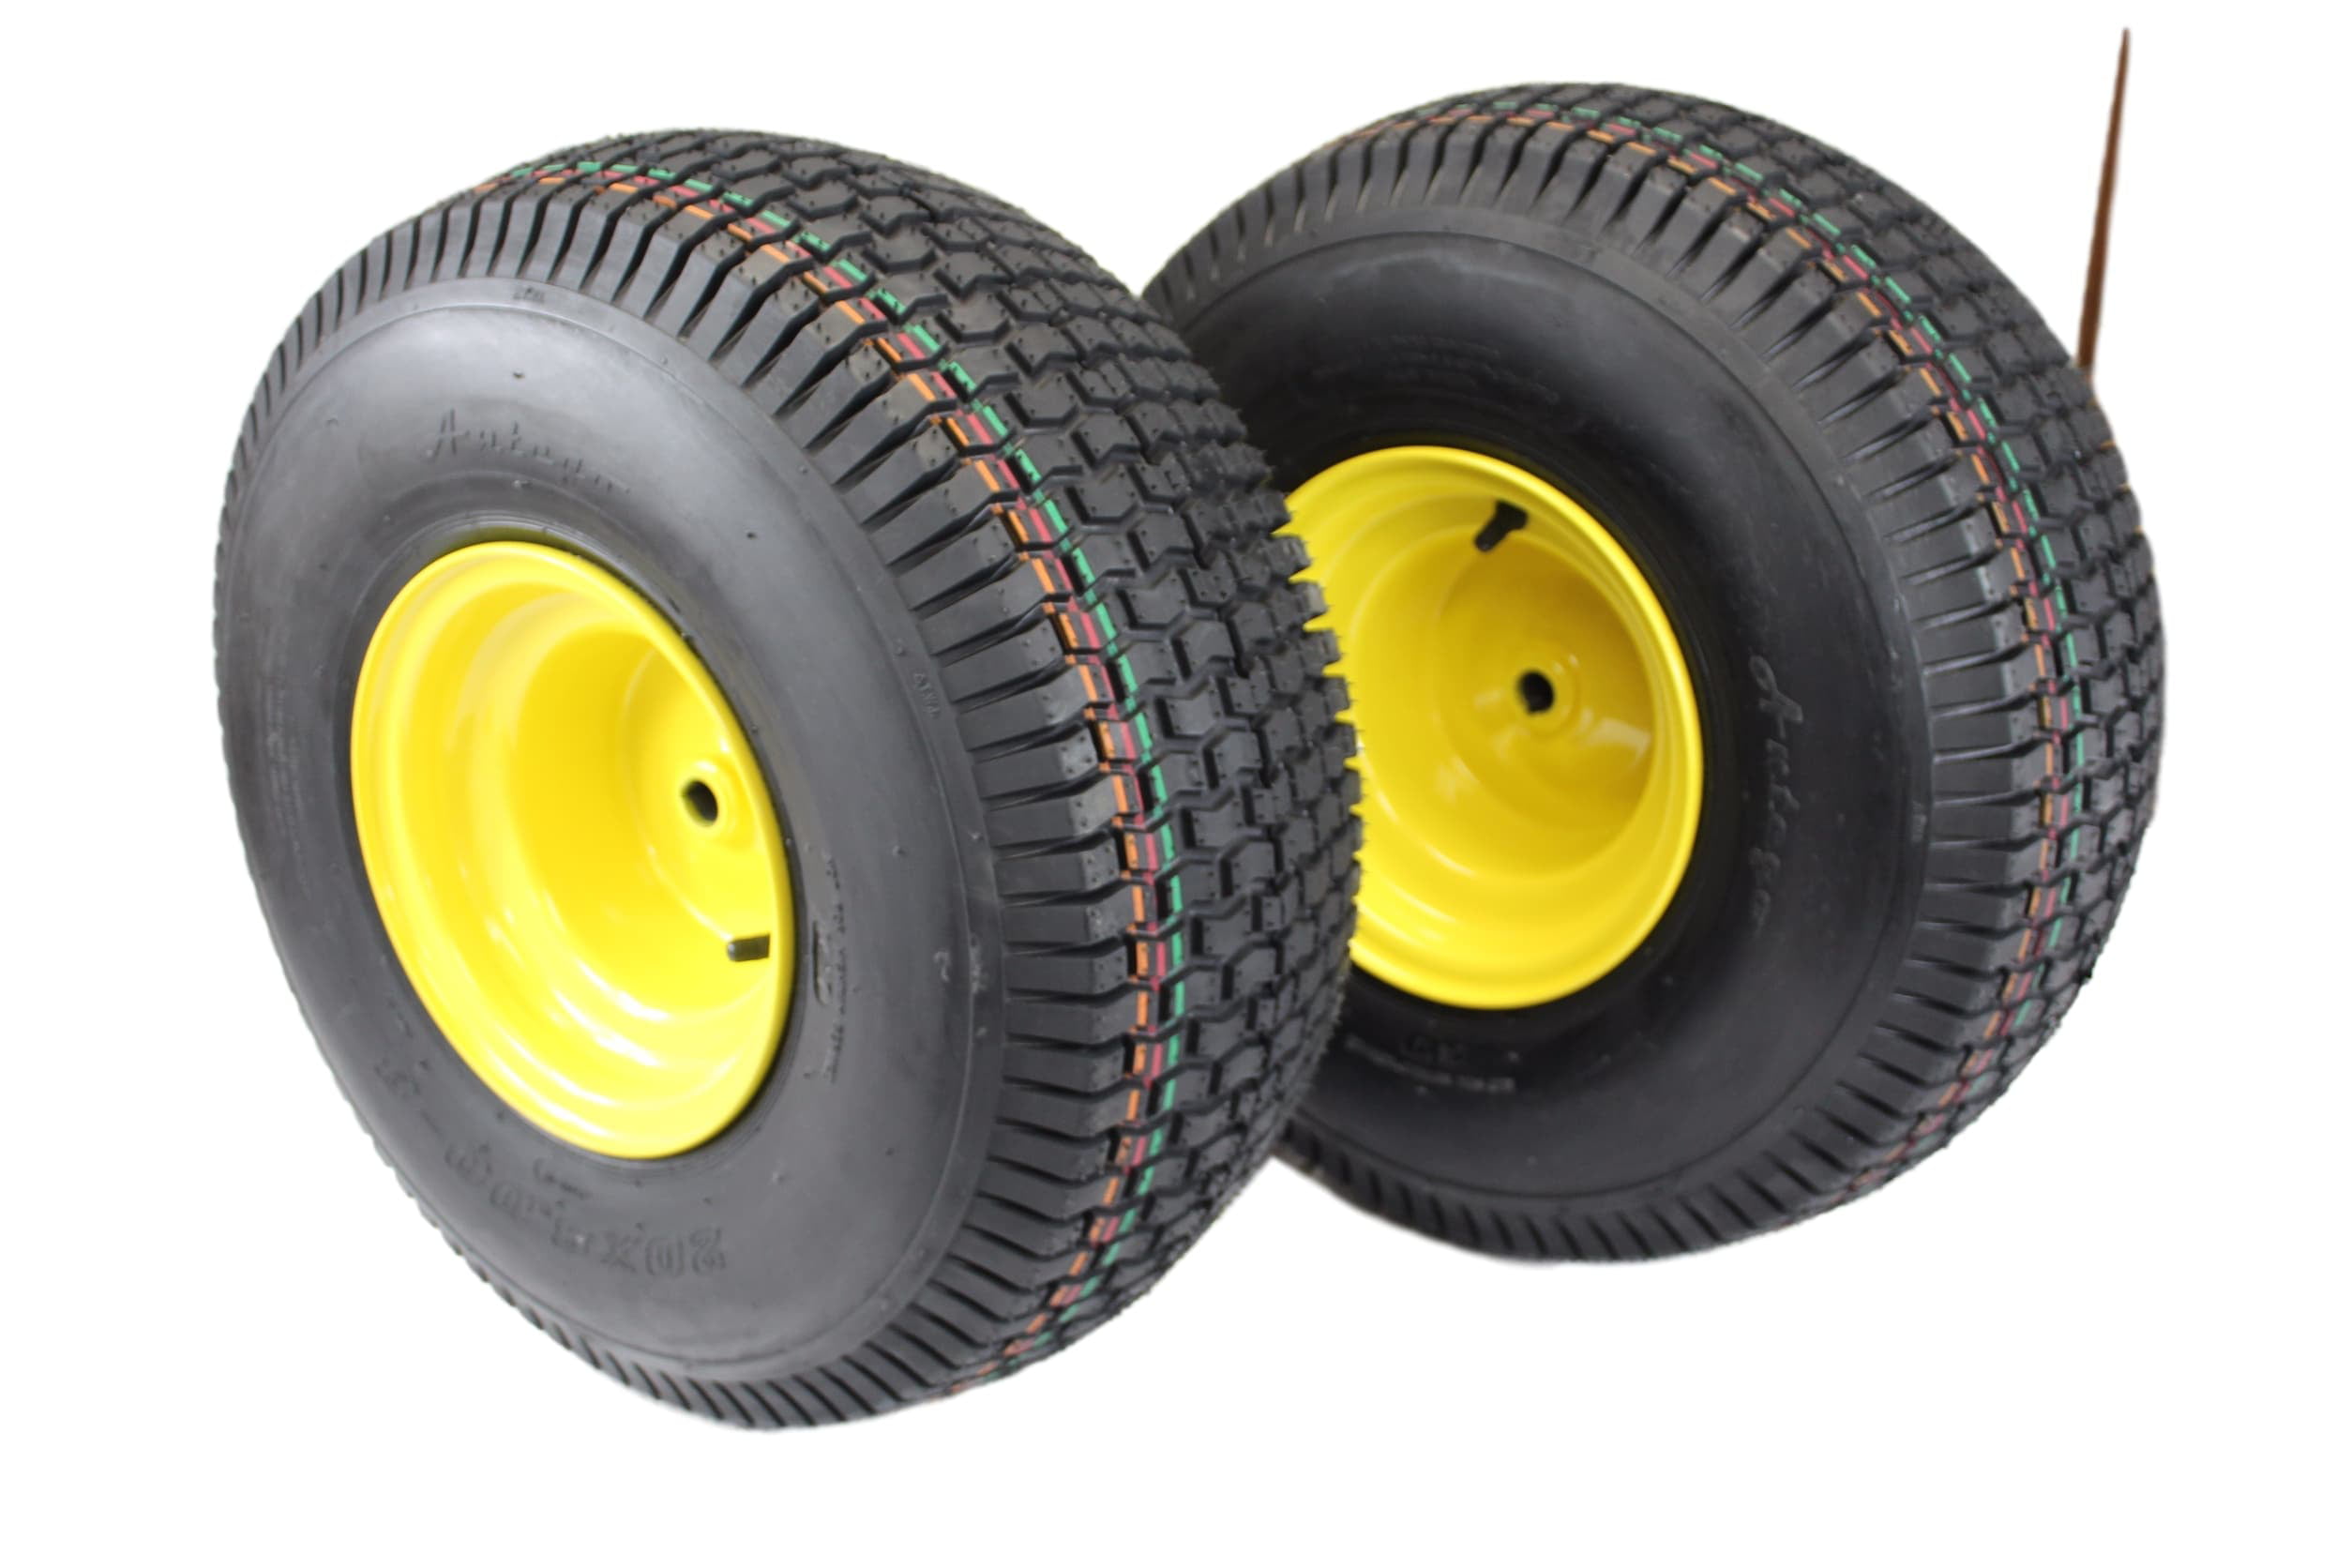 2 16x6.50-8 TURF TIRES 4 Ply Tubeless for John Deere Lawn Mower Tractor Rider 